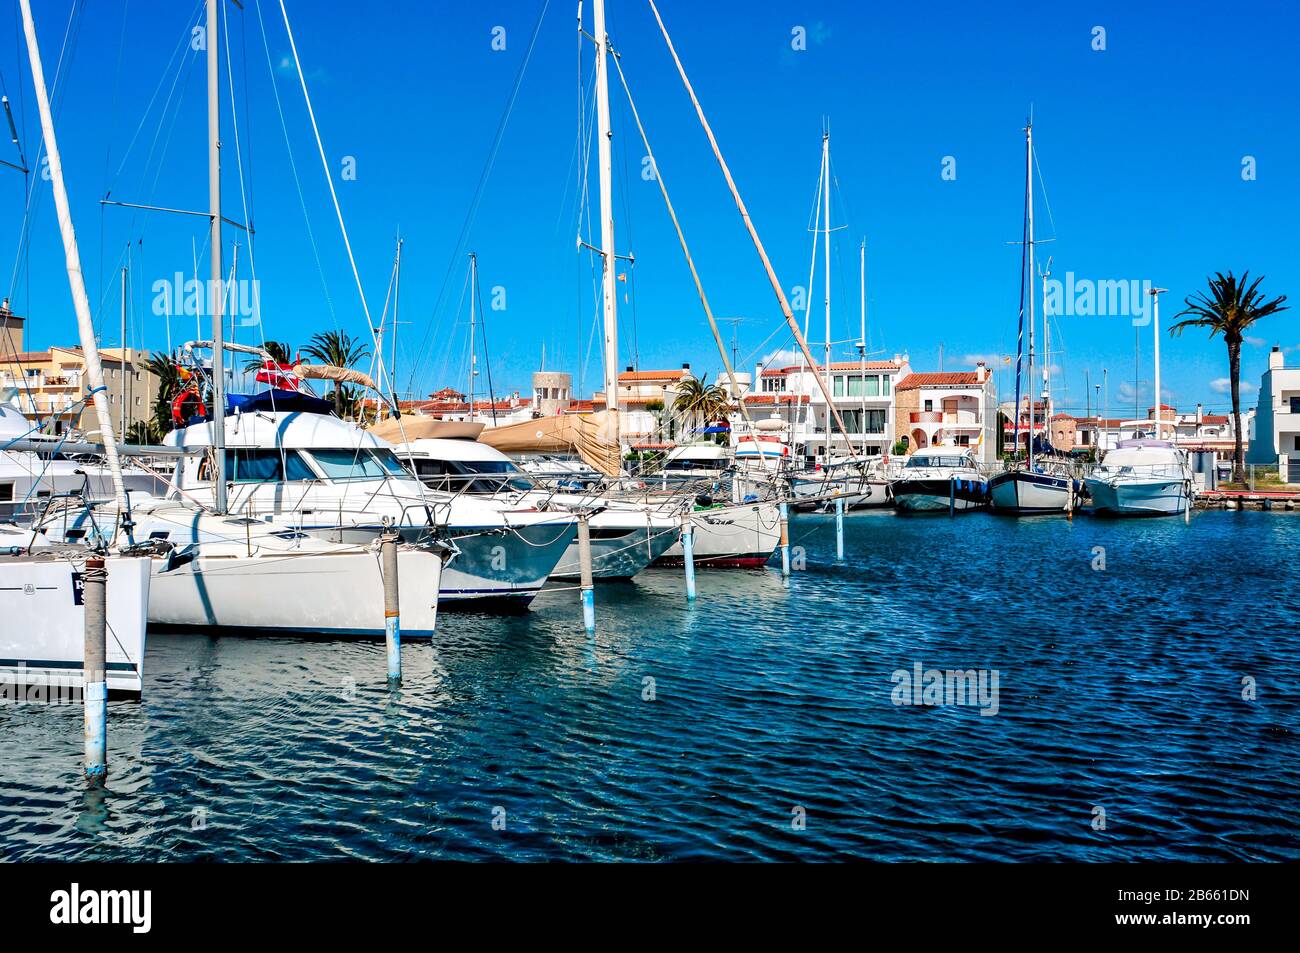 CASTELLO DE EMPURIES, SPAIN - MAY 21: Yachts moored in the marina of Empuriabrava on May 21, 2015 in Castello de Empuries, Costa Brava, Spain. Empuria Stock Photo